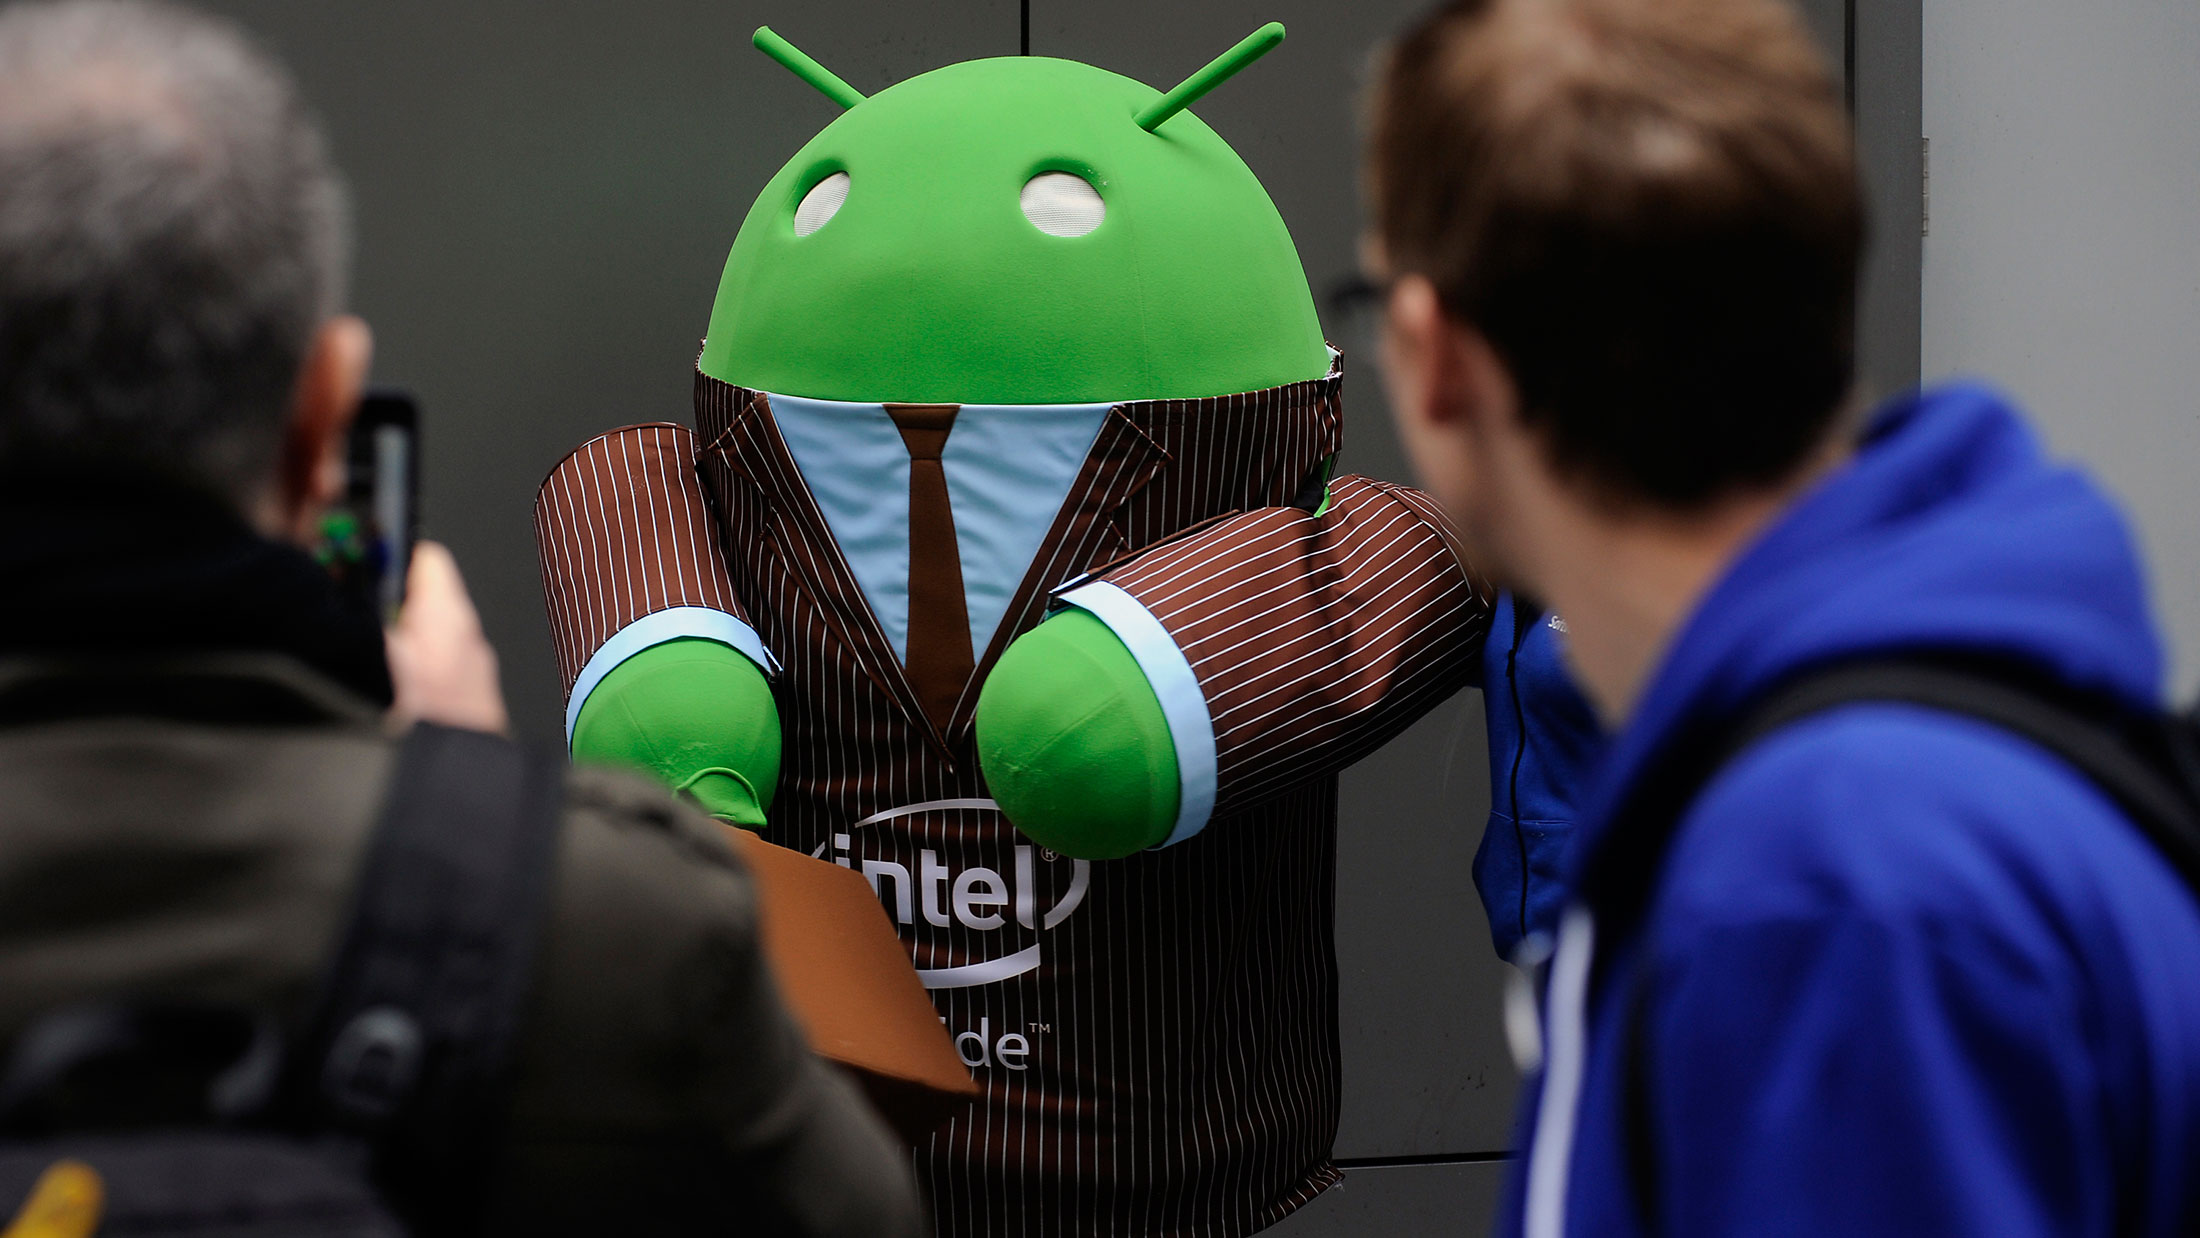 An Android mascot prior the start of the Google I/O Annual Developers Conference in San Francisco on May 28, 2014.
